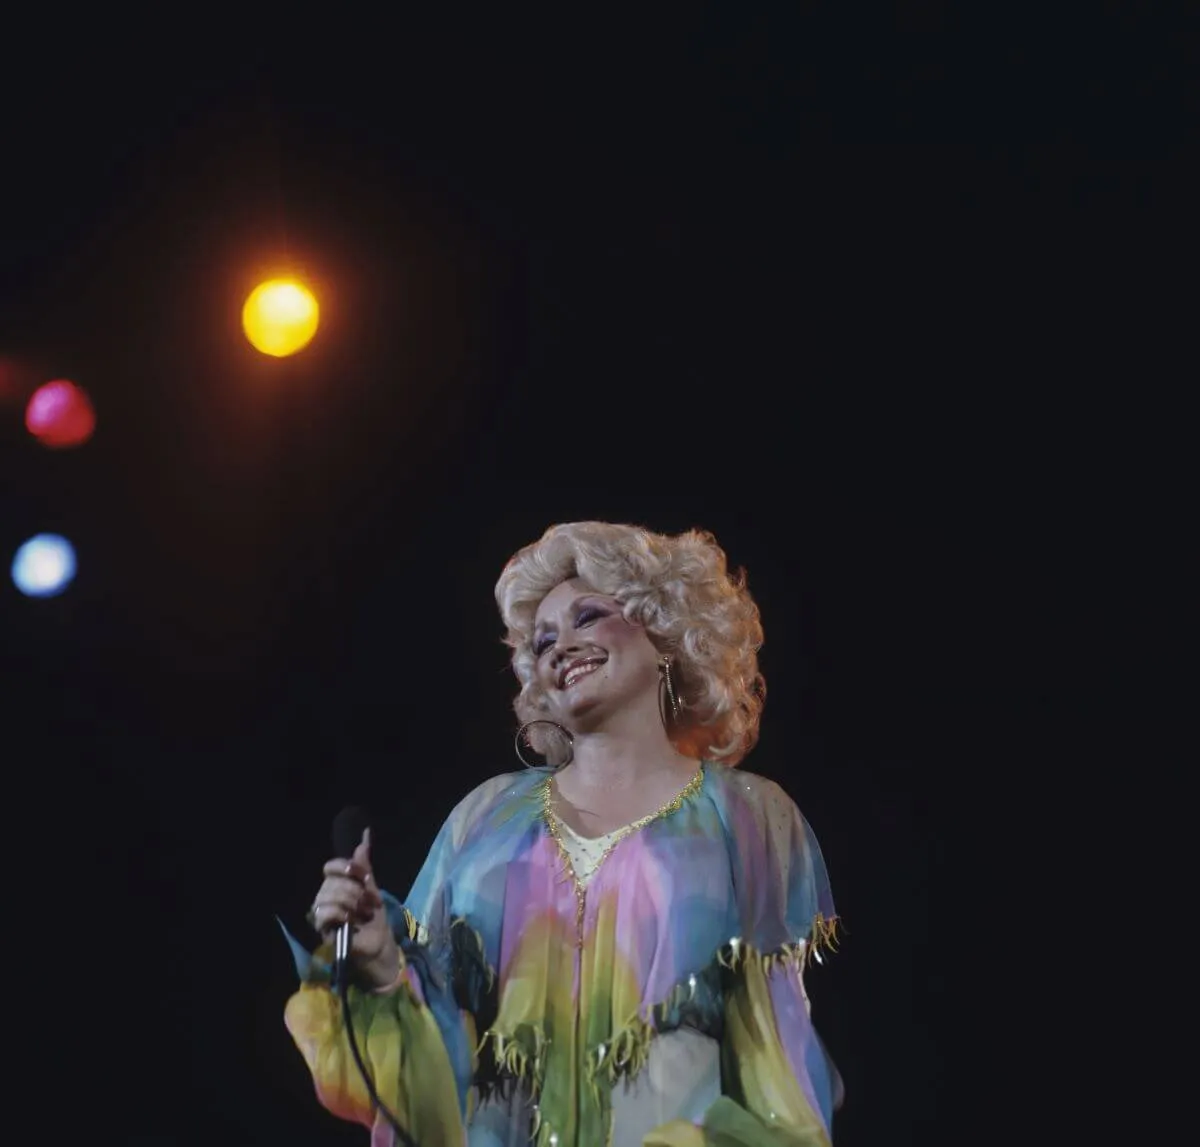 Dolly Parton wears a multicolored shirt and holds a microphone.